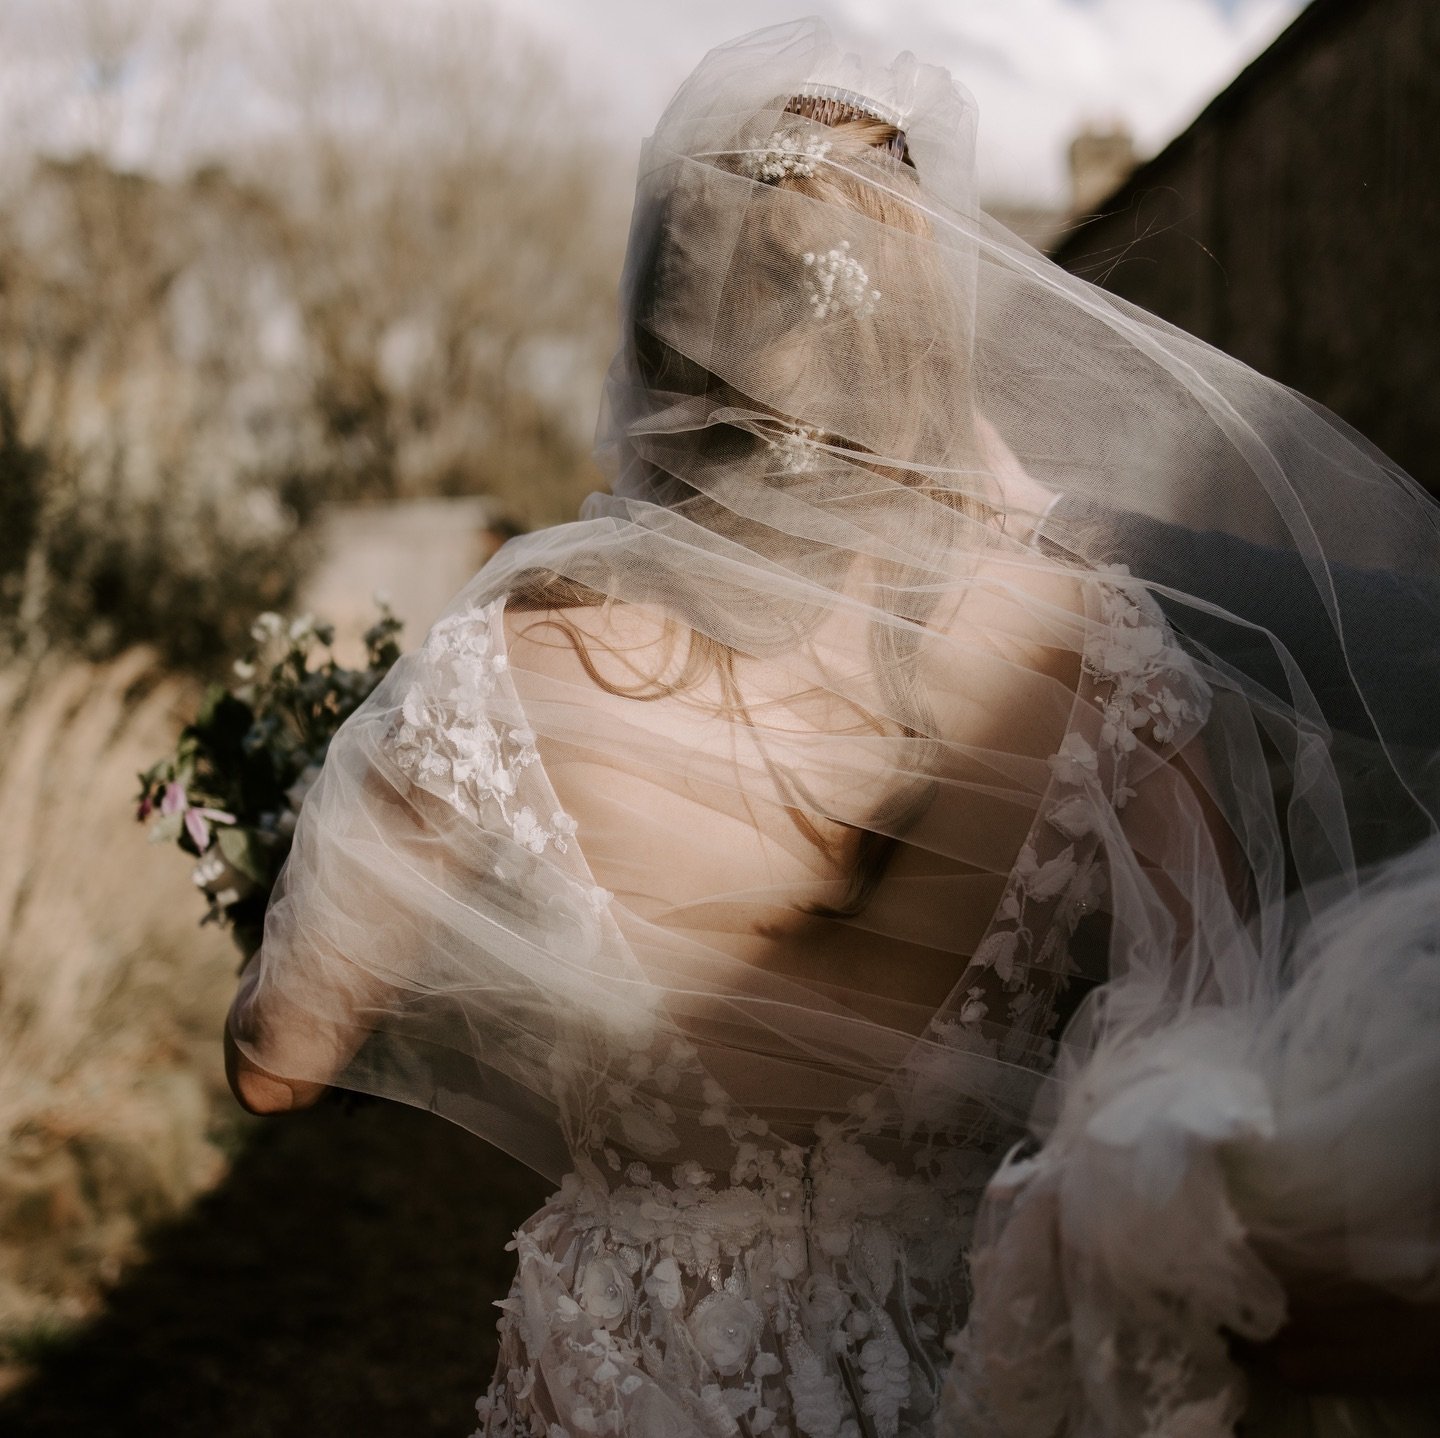 T H E 

Only good thing about a storm. 

Storm + veil + running back inside = lovely movement 

@candice.t.lewis @wyresdalepark @wyresdaleweddings 

#stormkathleen #storm #veil #weddingveil #weddinghair #wyresdalepark #lancashire #cumbria